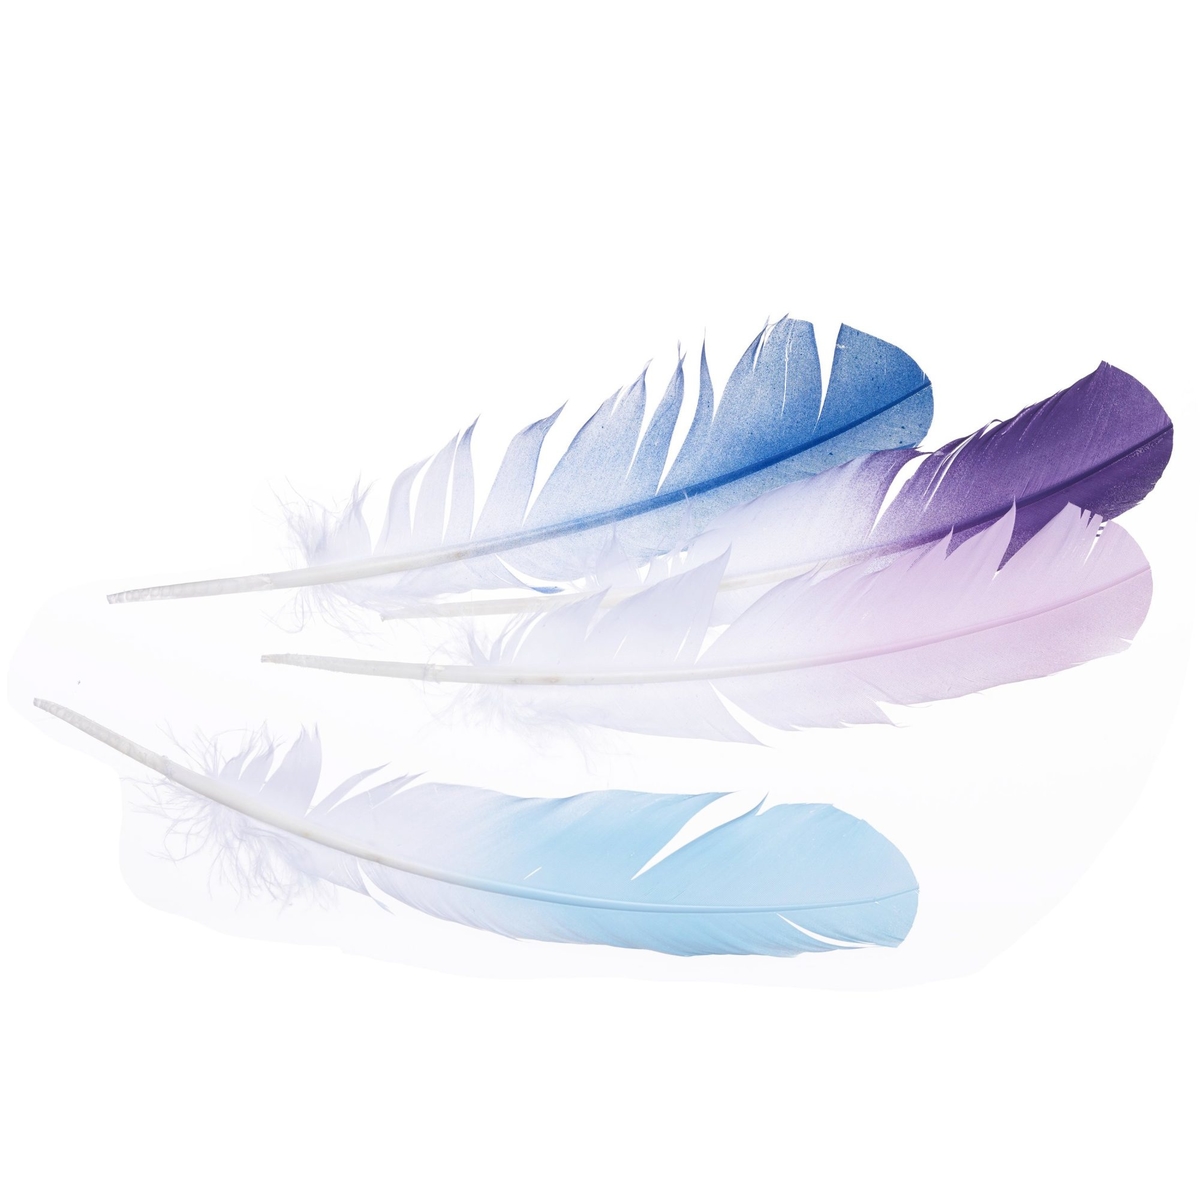 Spray paint feathers